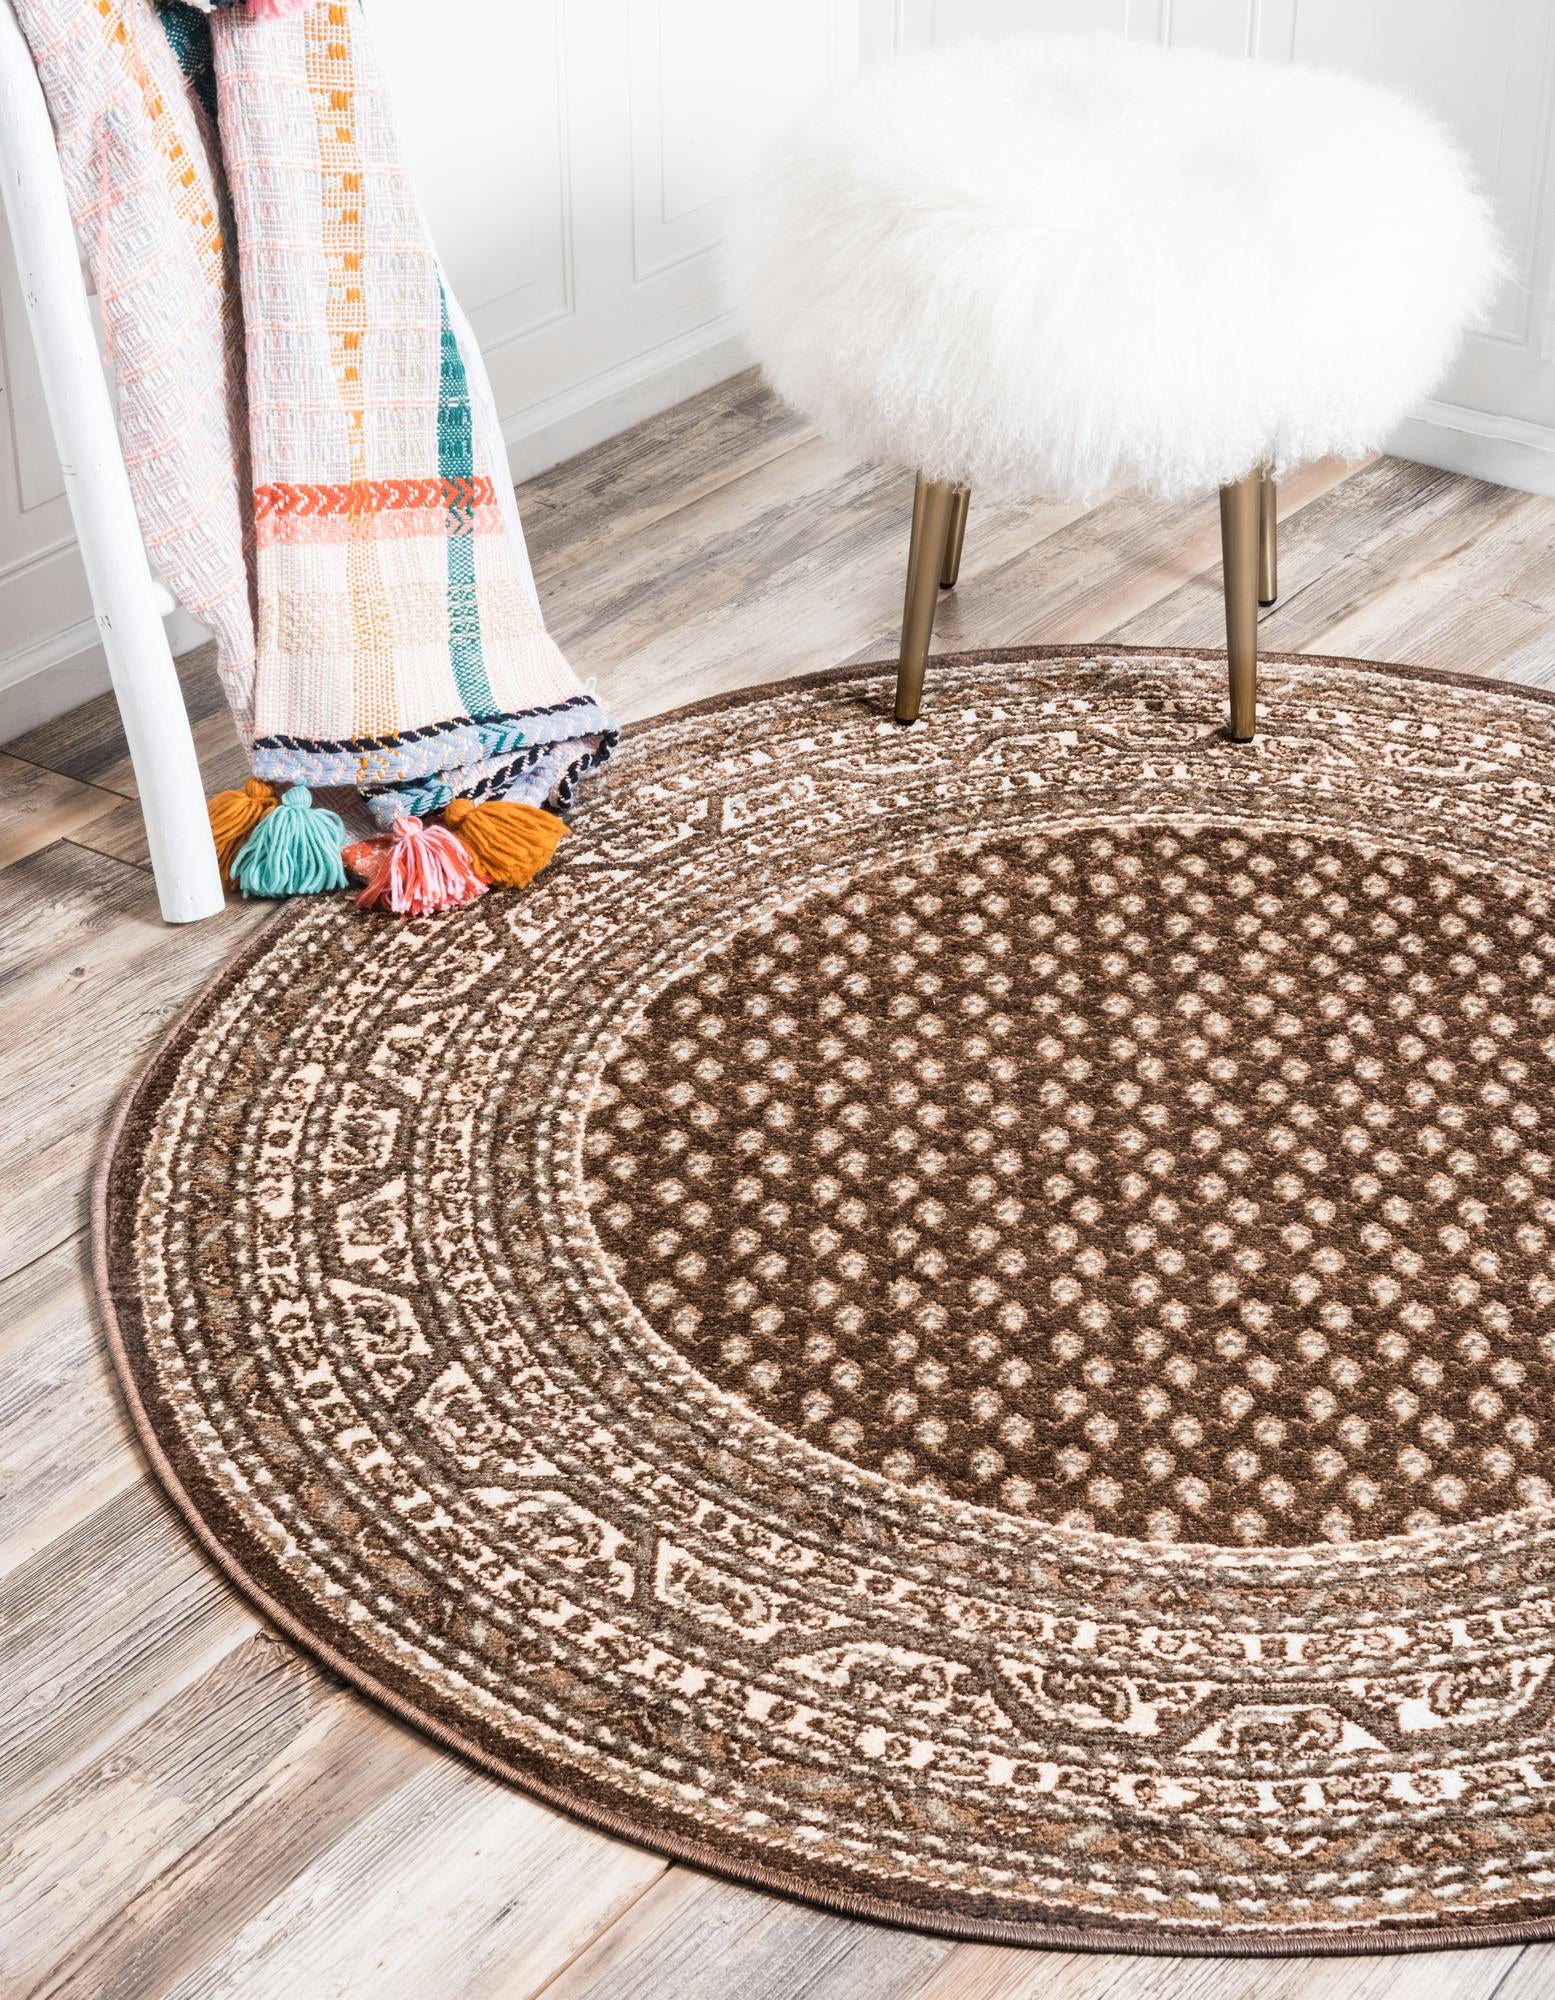 Unique Loom Allover Williamsburg Rug Brown/Beige 3' 7" Round Hand Made Geometric Traditional Perfect For Dining Room Entryway Bed Room Kids Room - image 1 of 3